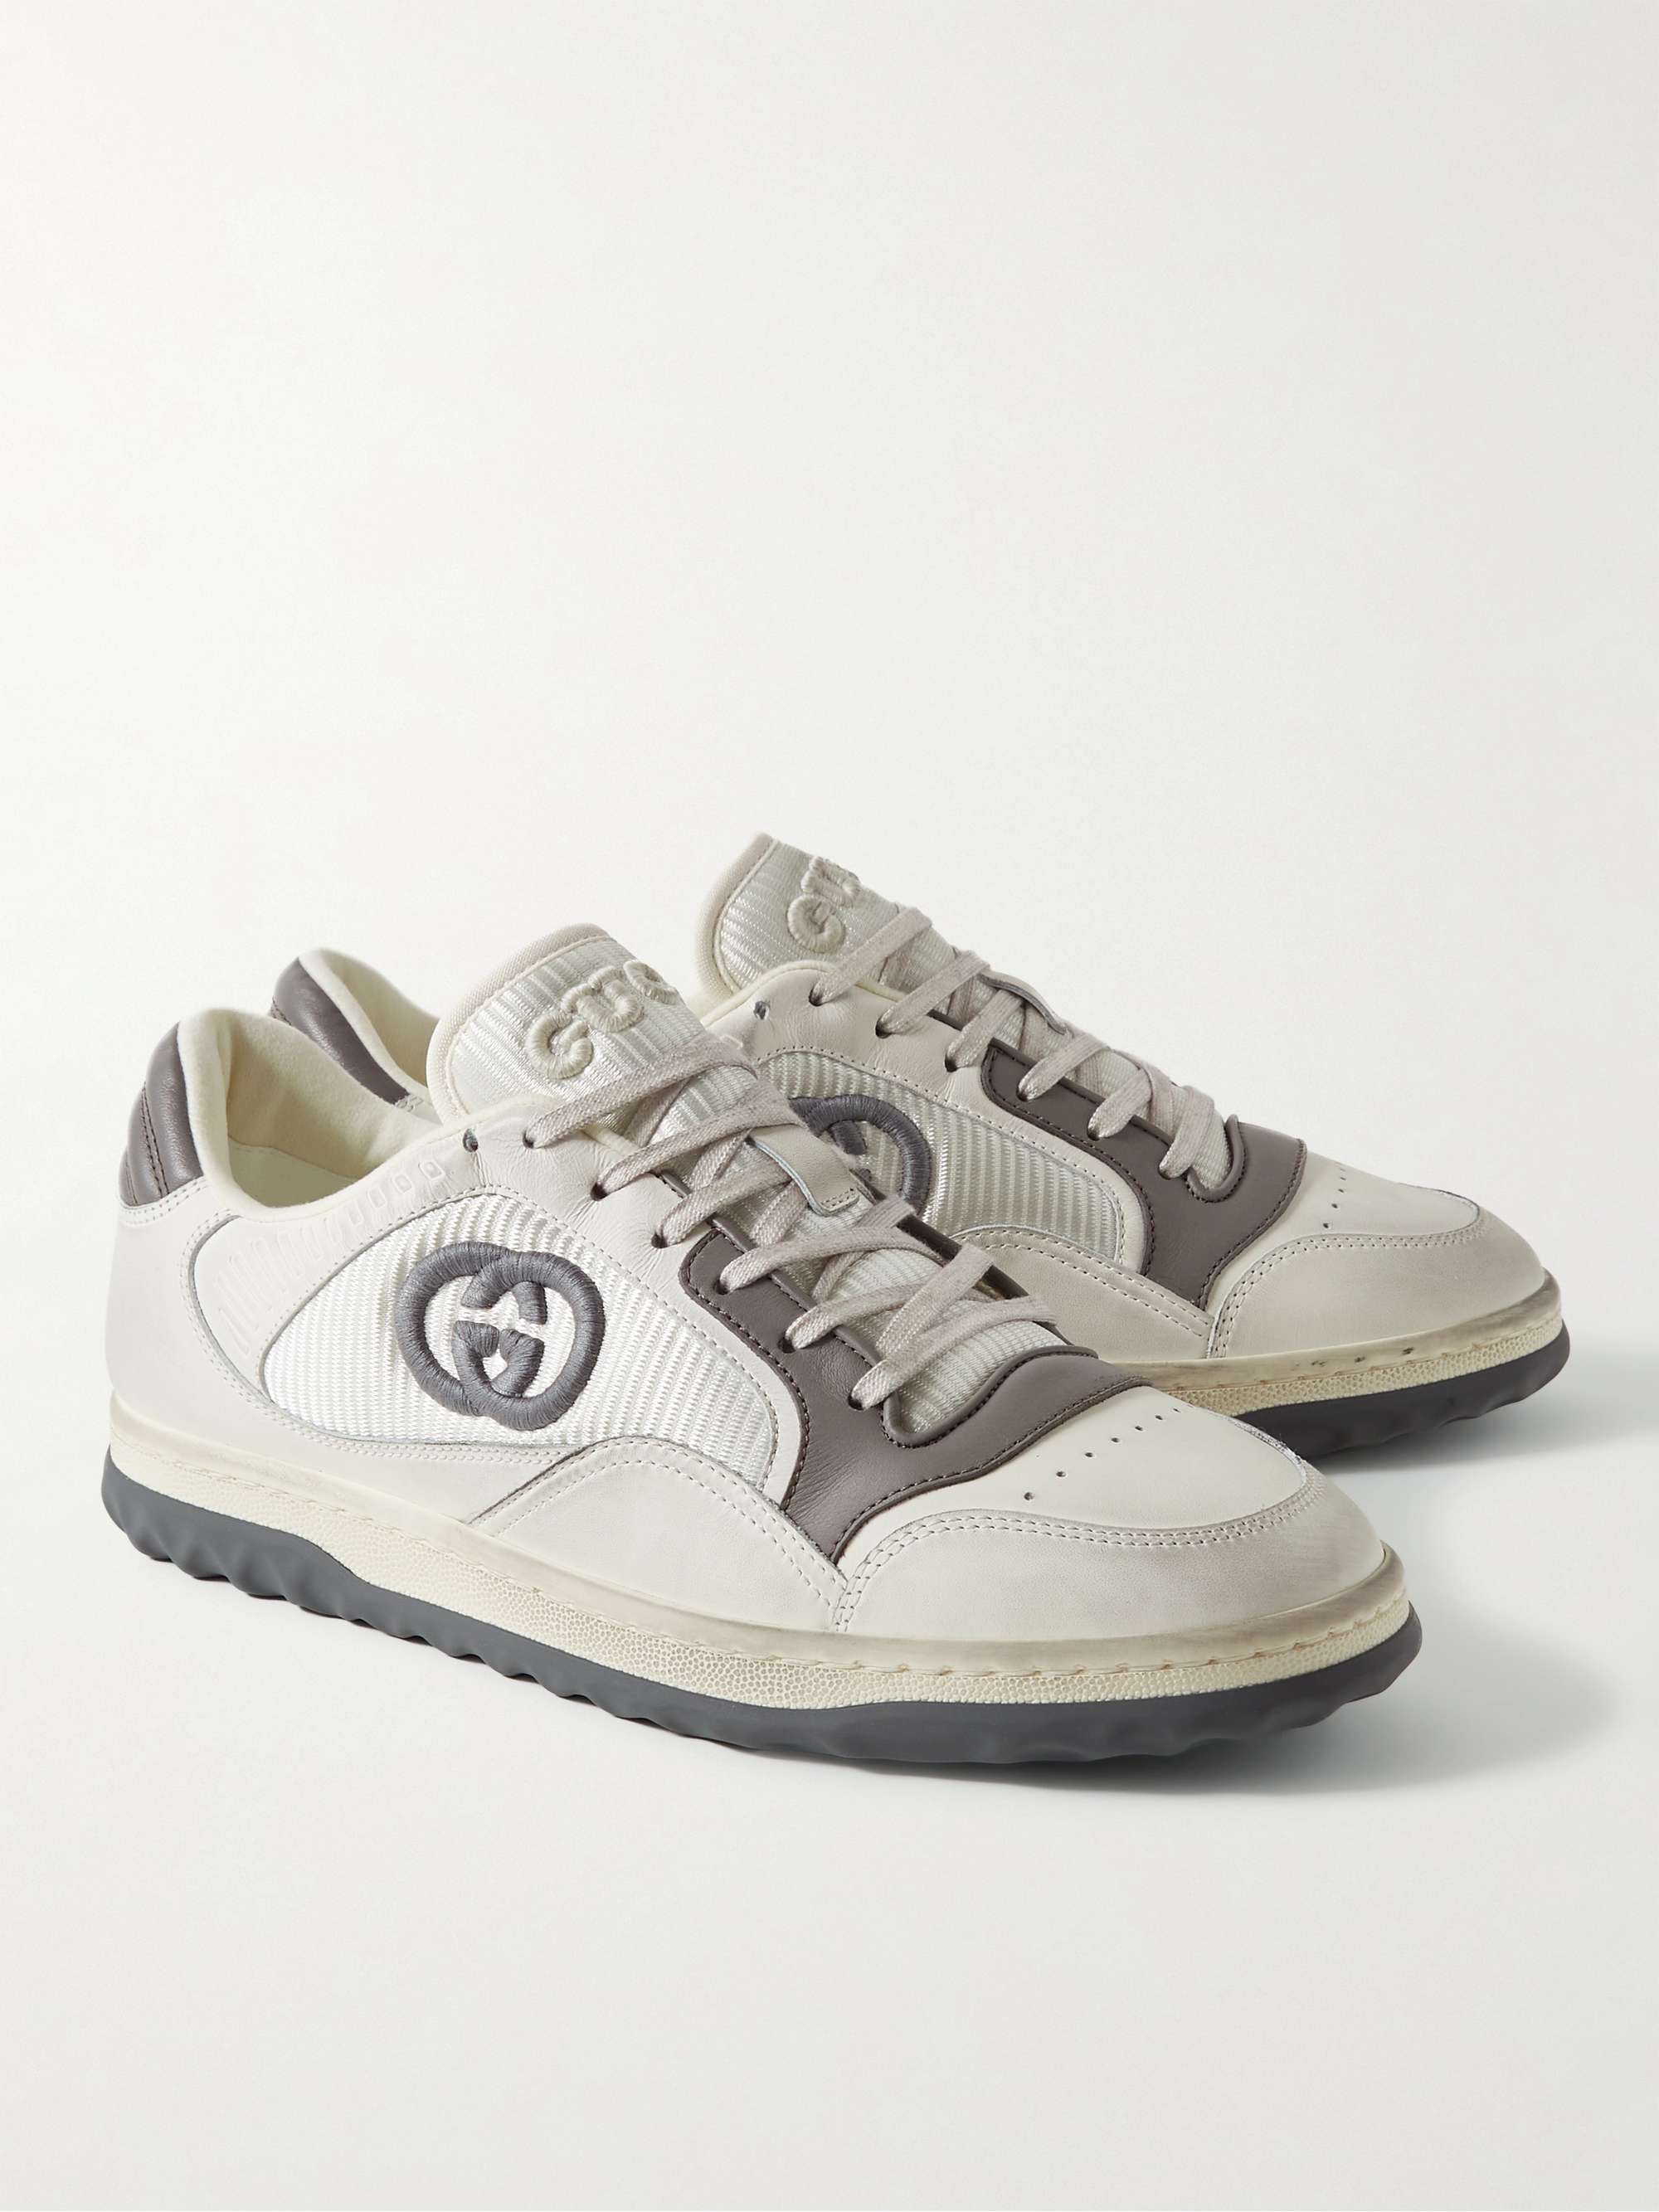 GUCCI Mac80 Logo-Embroidered Leather and Mesh Sneakers | MR PORTER